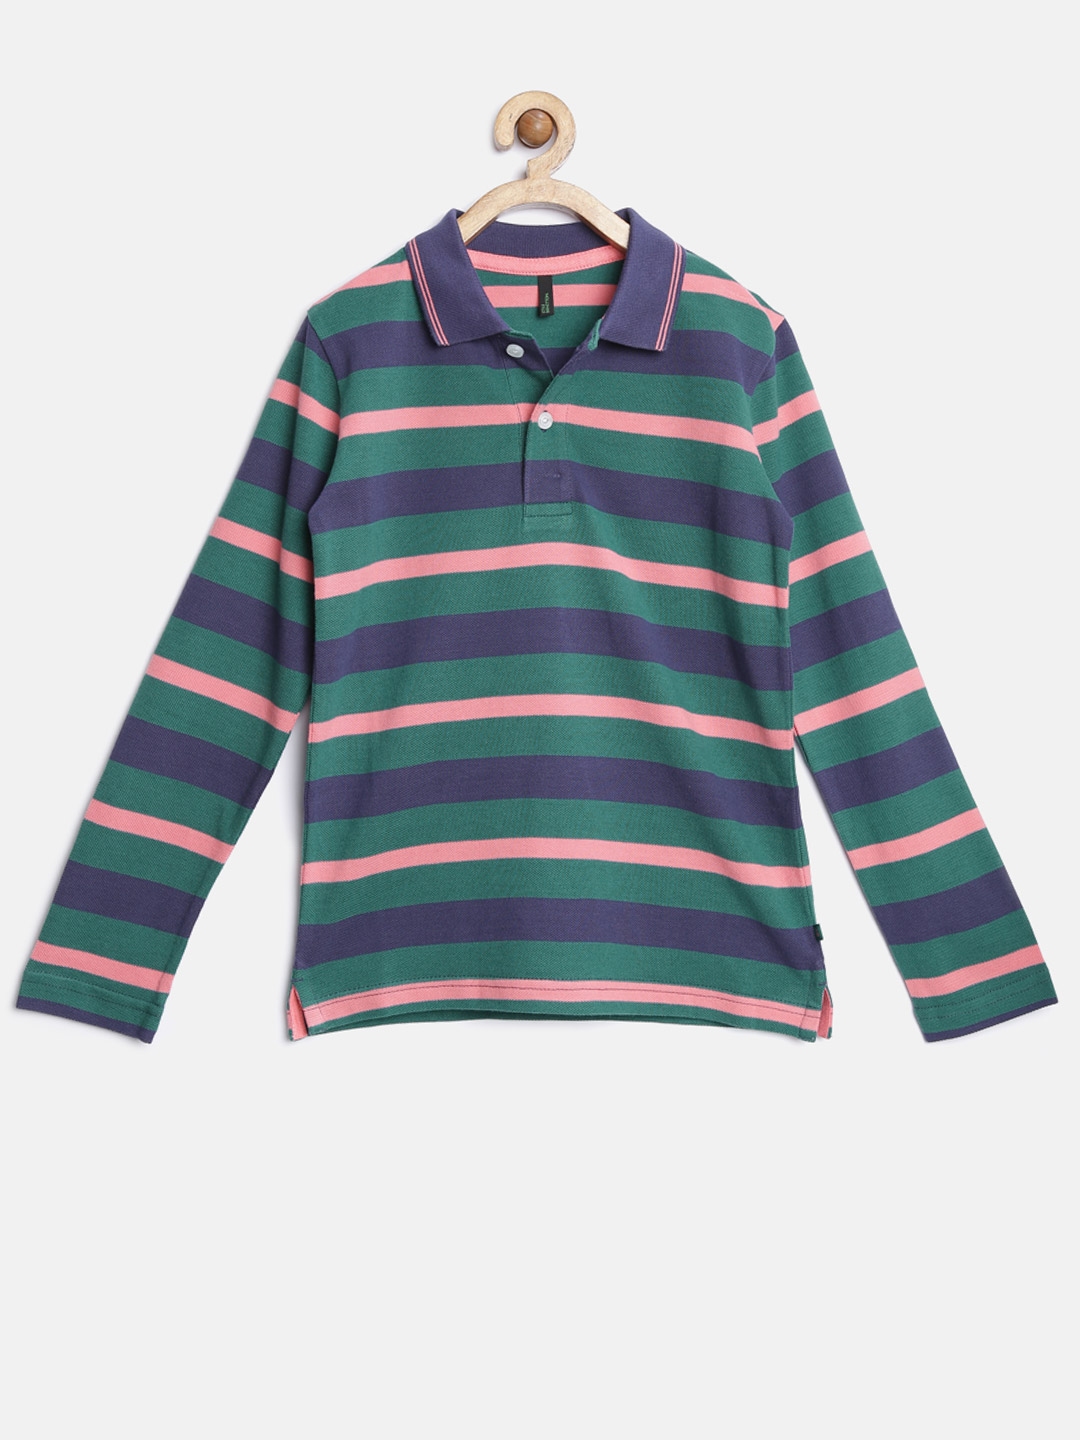 Buy United Colors Of Benetton Boys Green Navy Striped Polo Pure Cotton ...